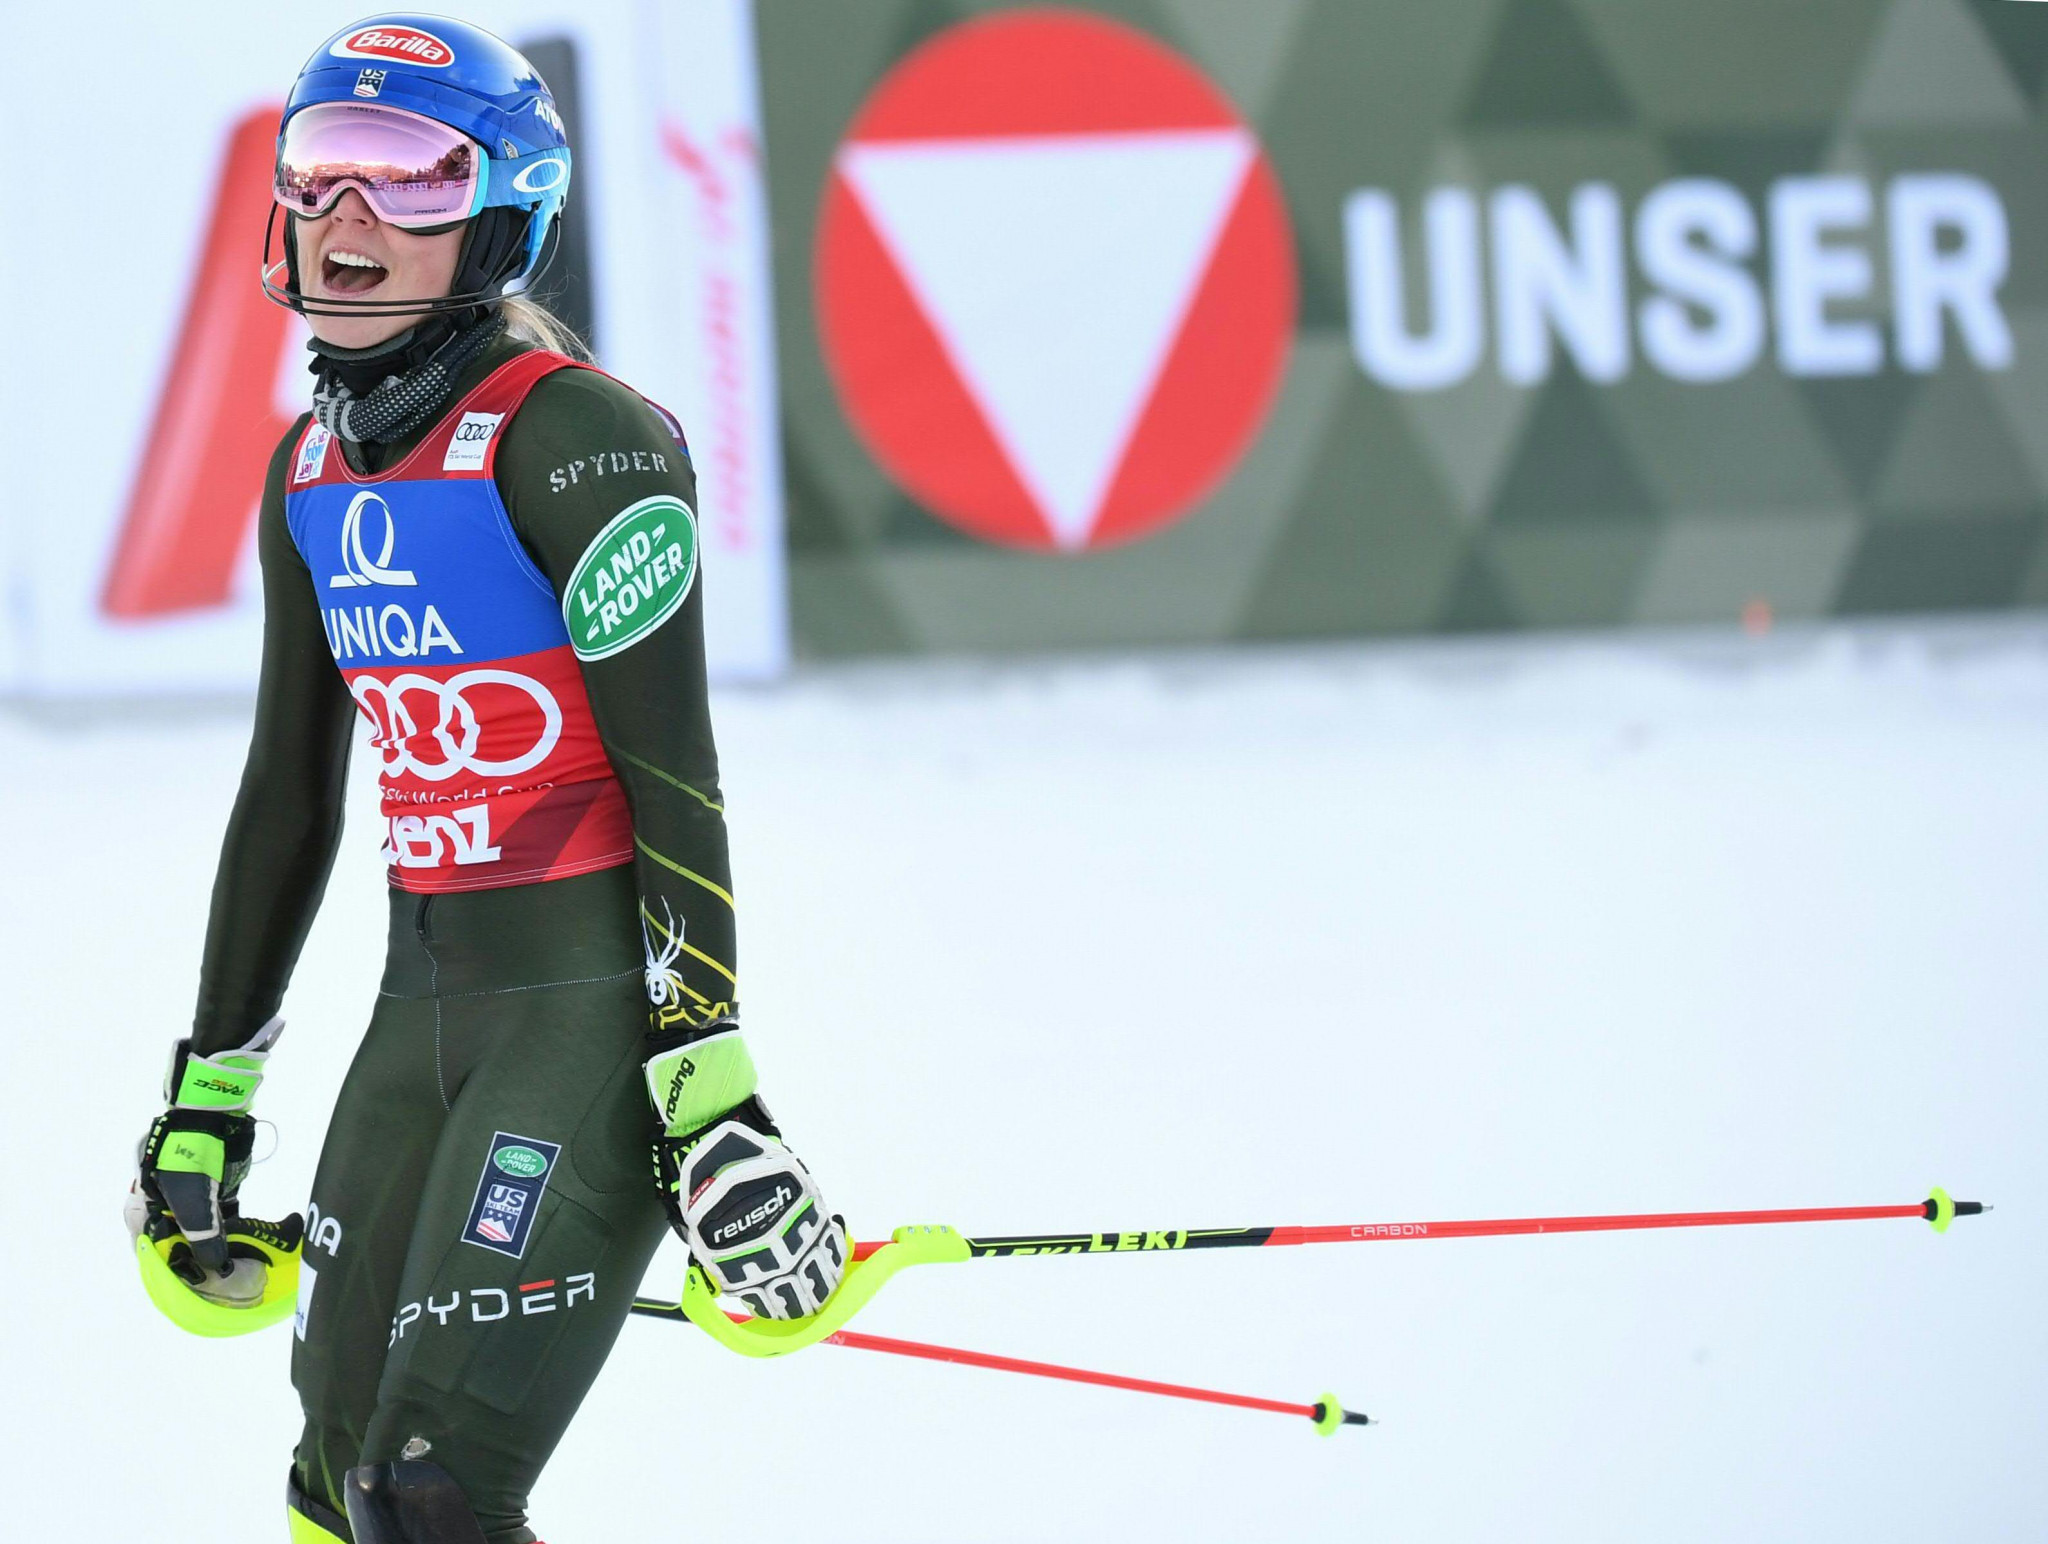 Shiffrin out to claim third straight victory at FIS Alpine Skiing World Cup in Zagreb